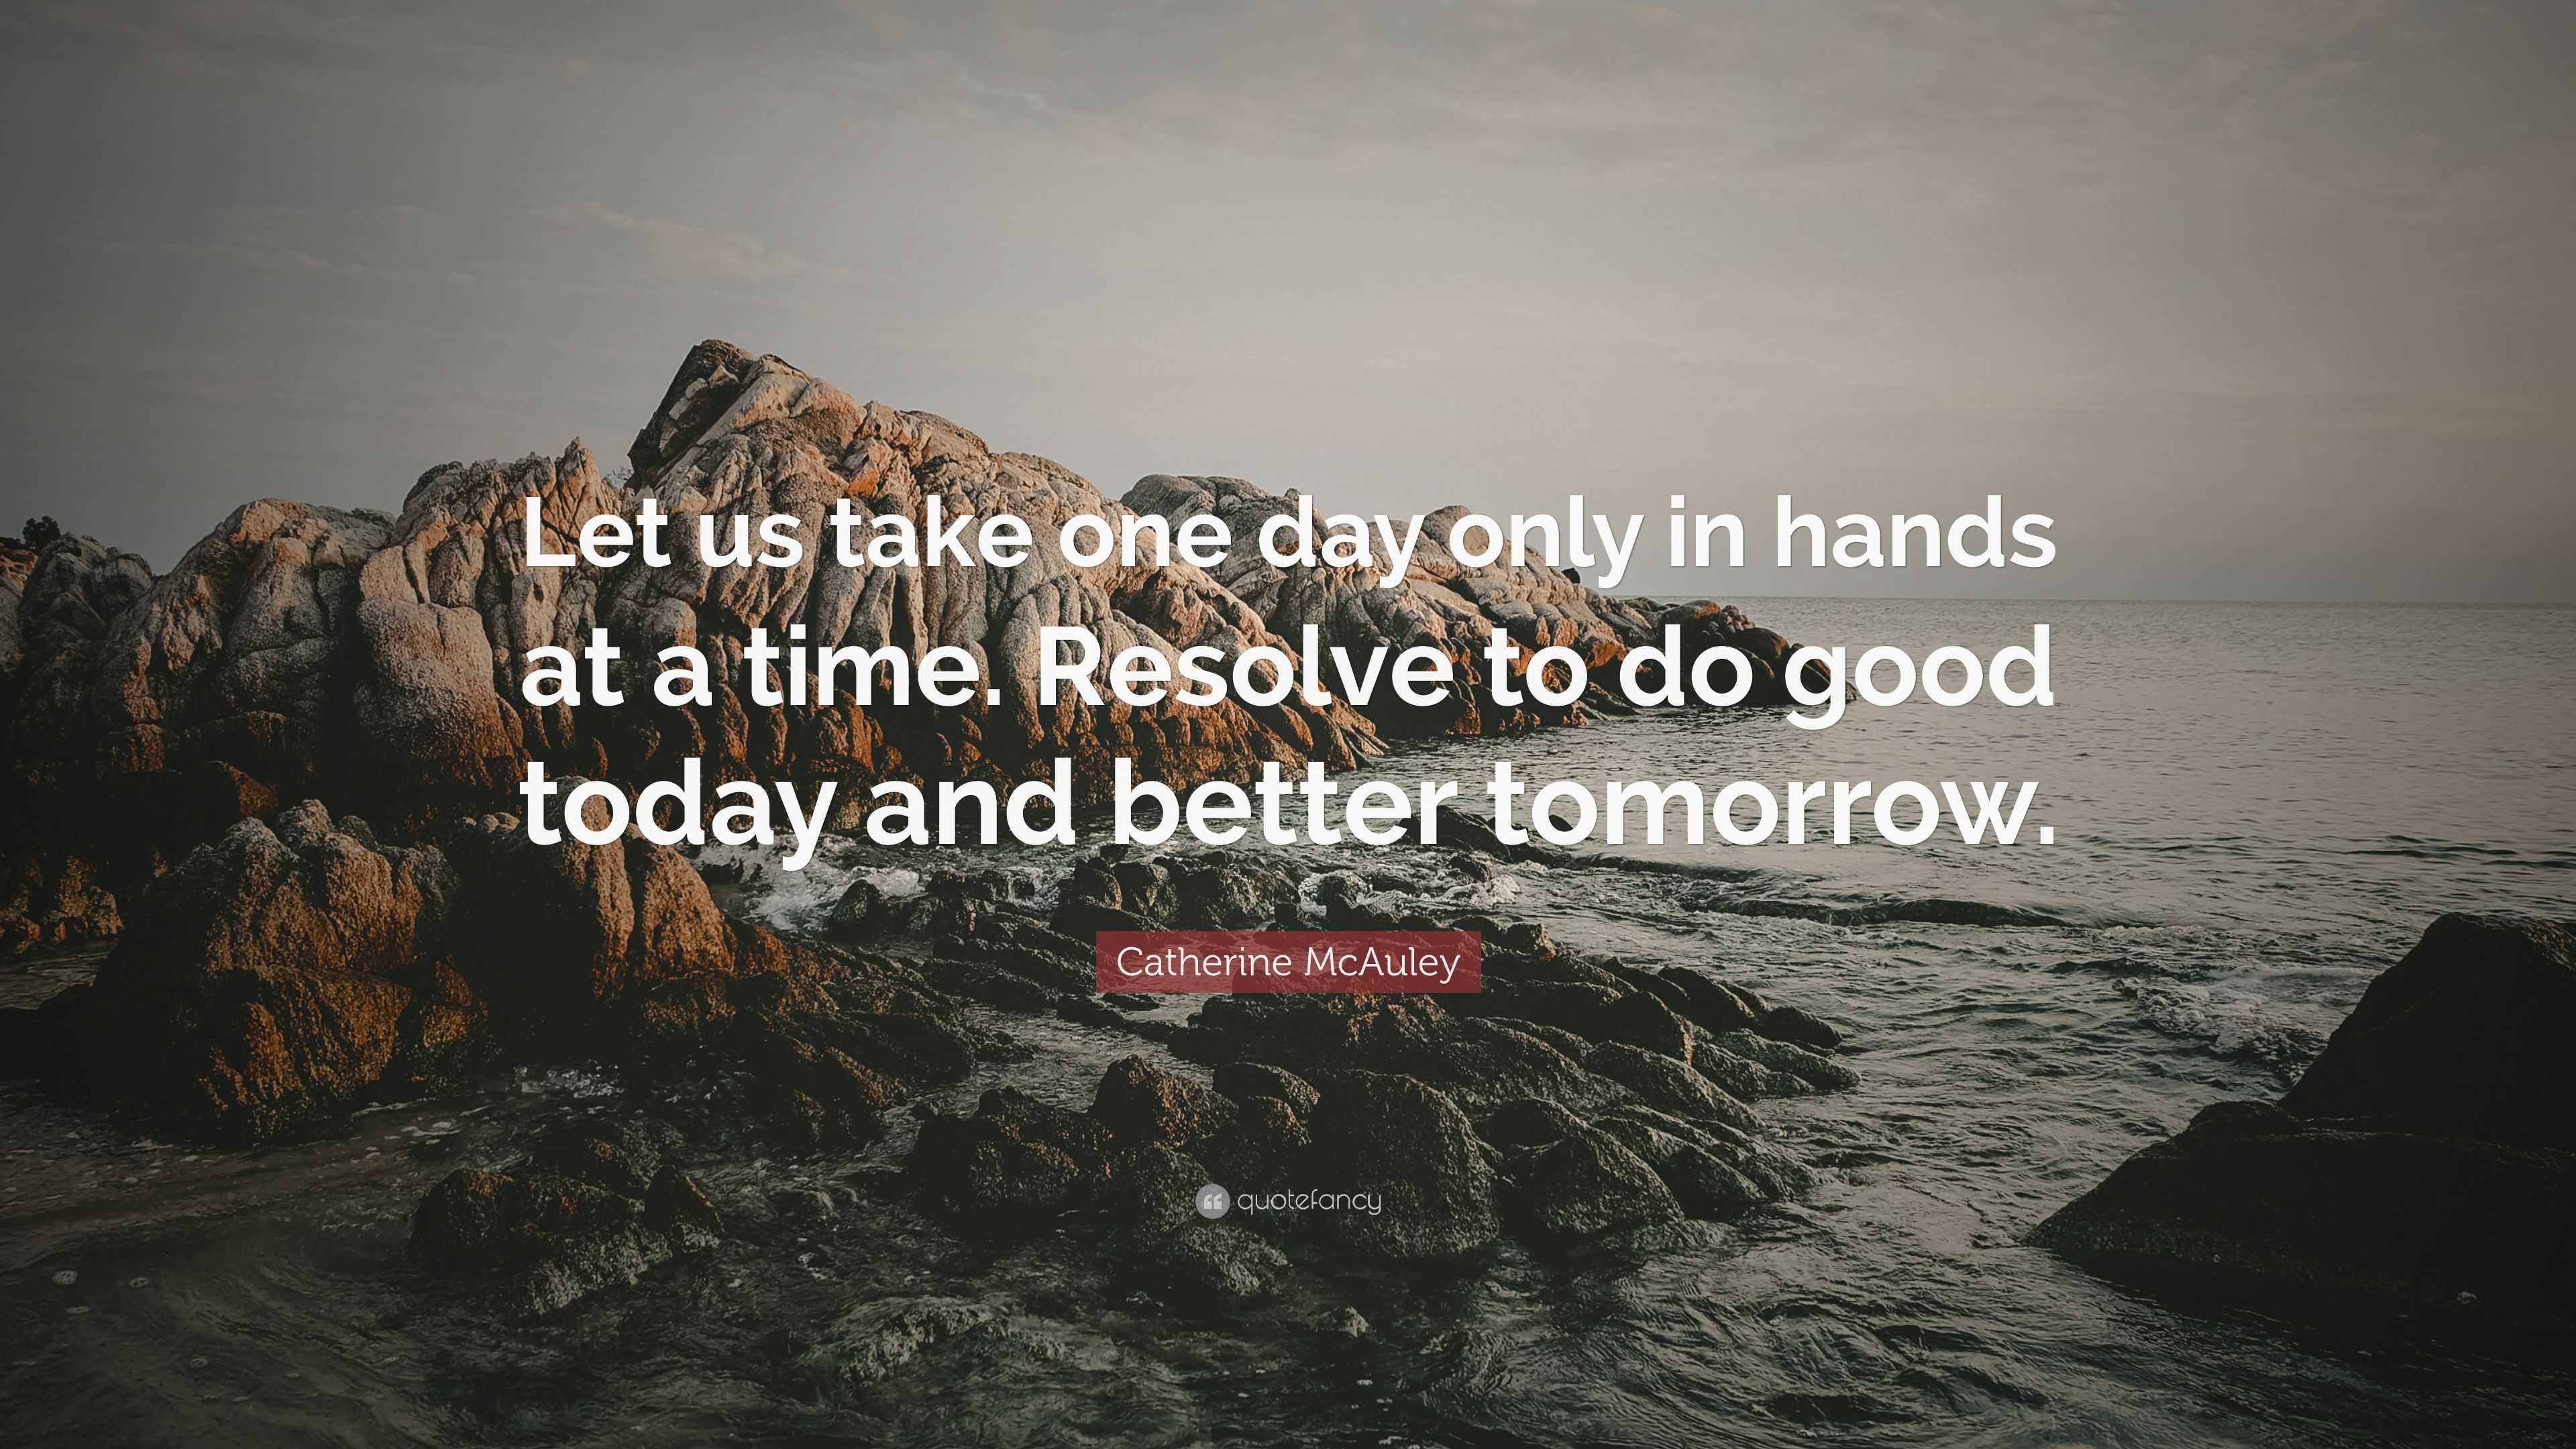 Catherine McAuley Quote: "Let us take one day only in hands at a time. Resolve to do good today ...